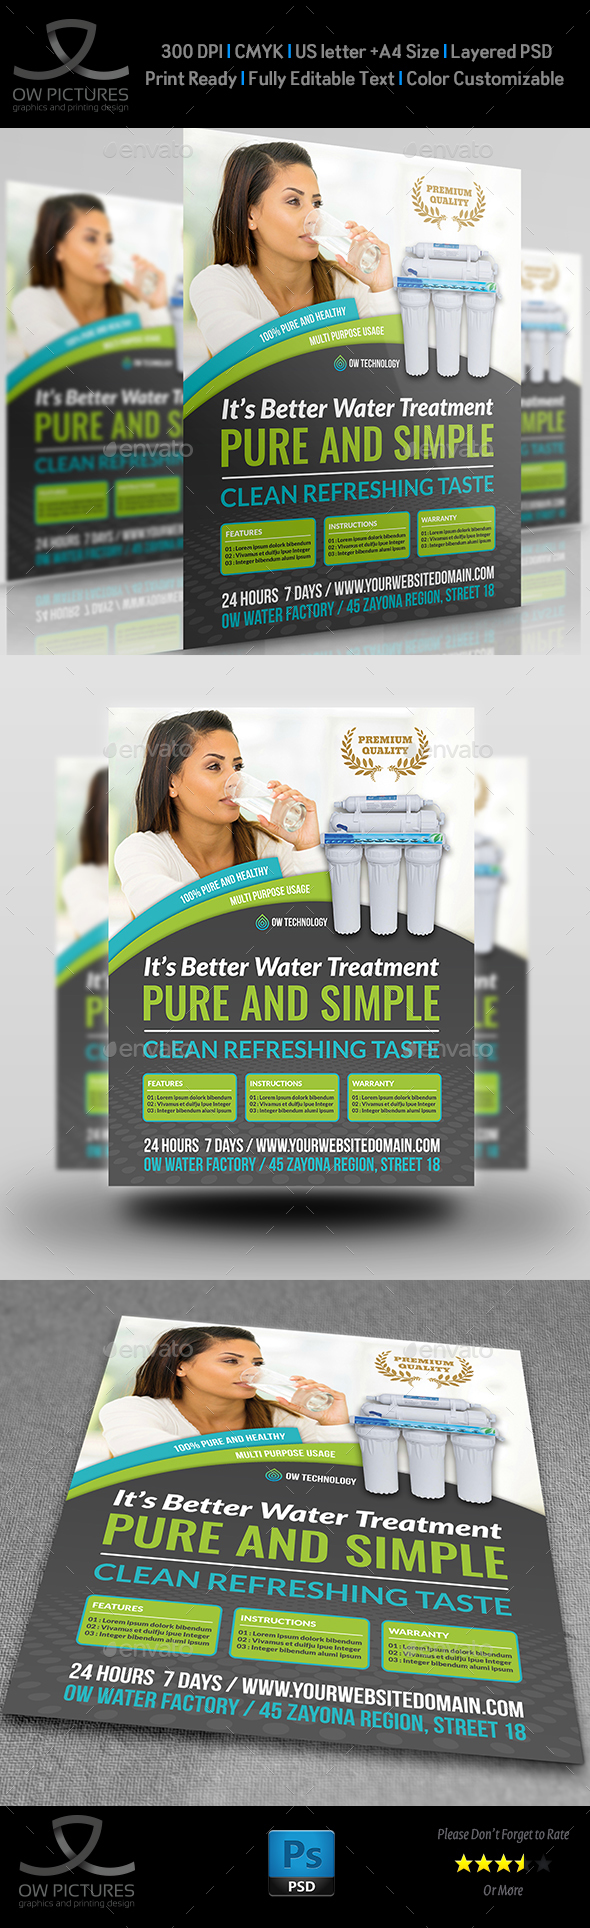 Water Treatment Services Flyer Template